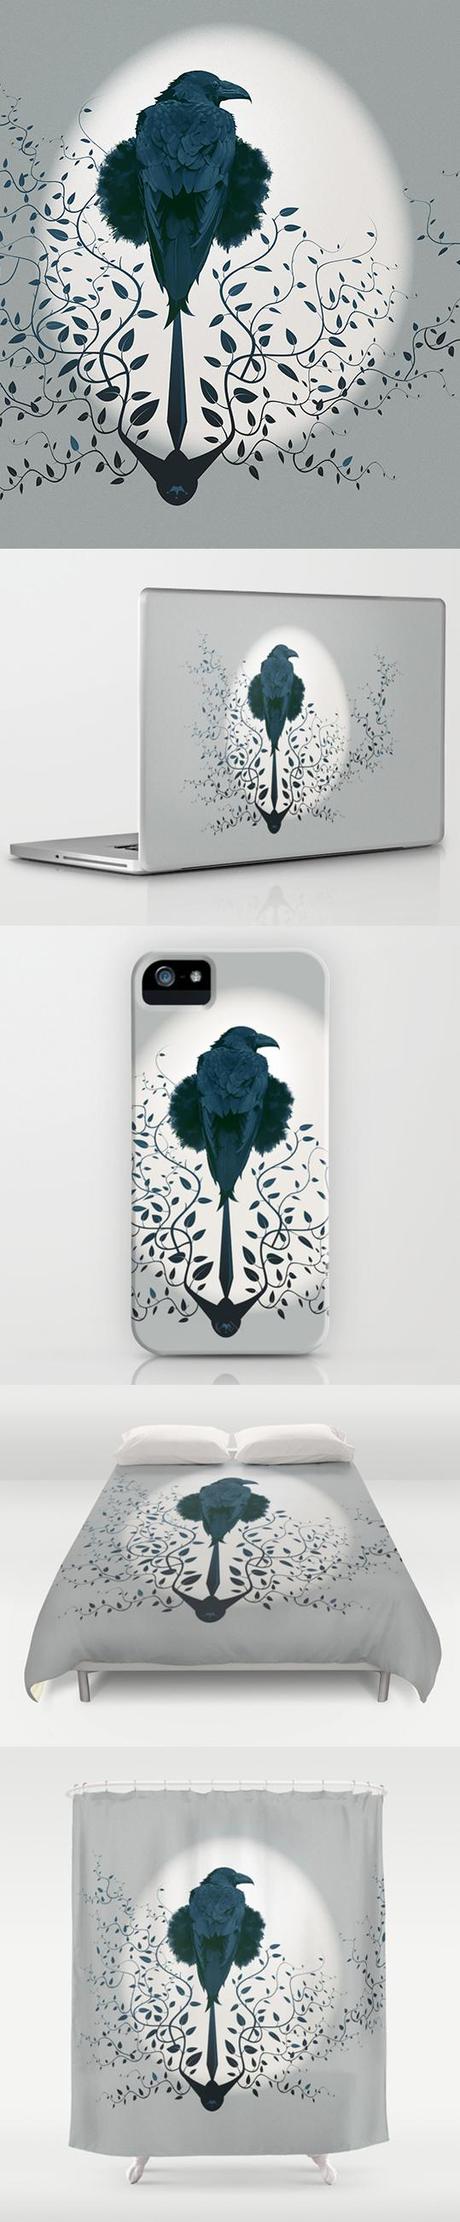 Tribute to game of thrones, coque iphone, tee-shirt, duvet, tableau... ©LilaVert